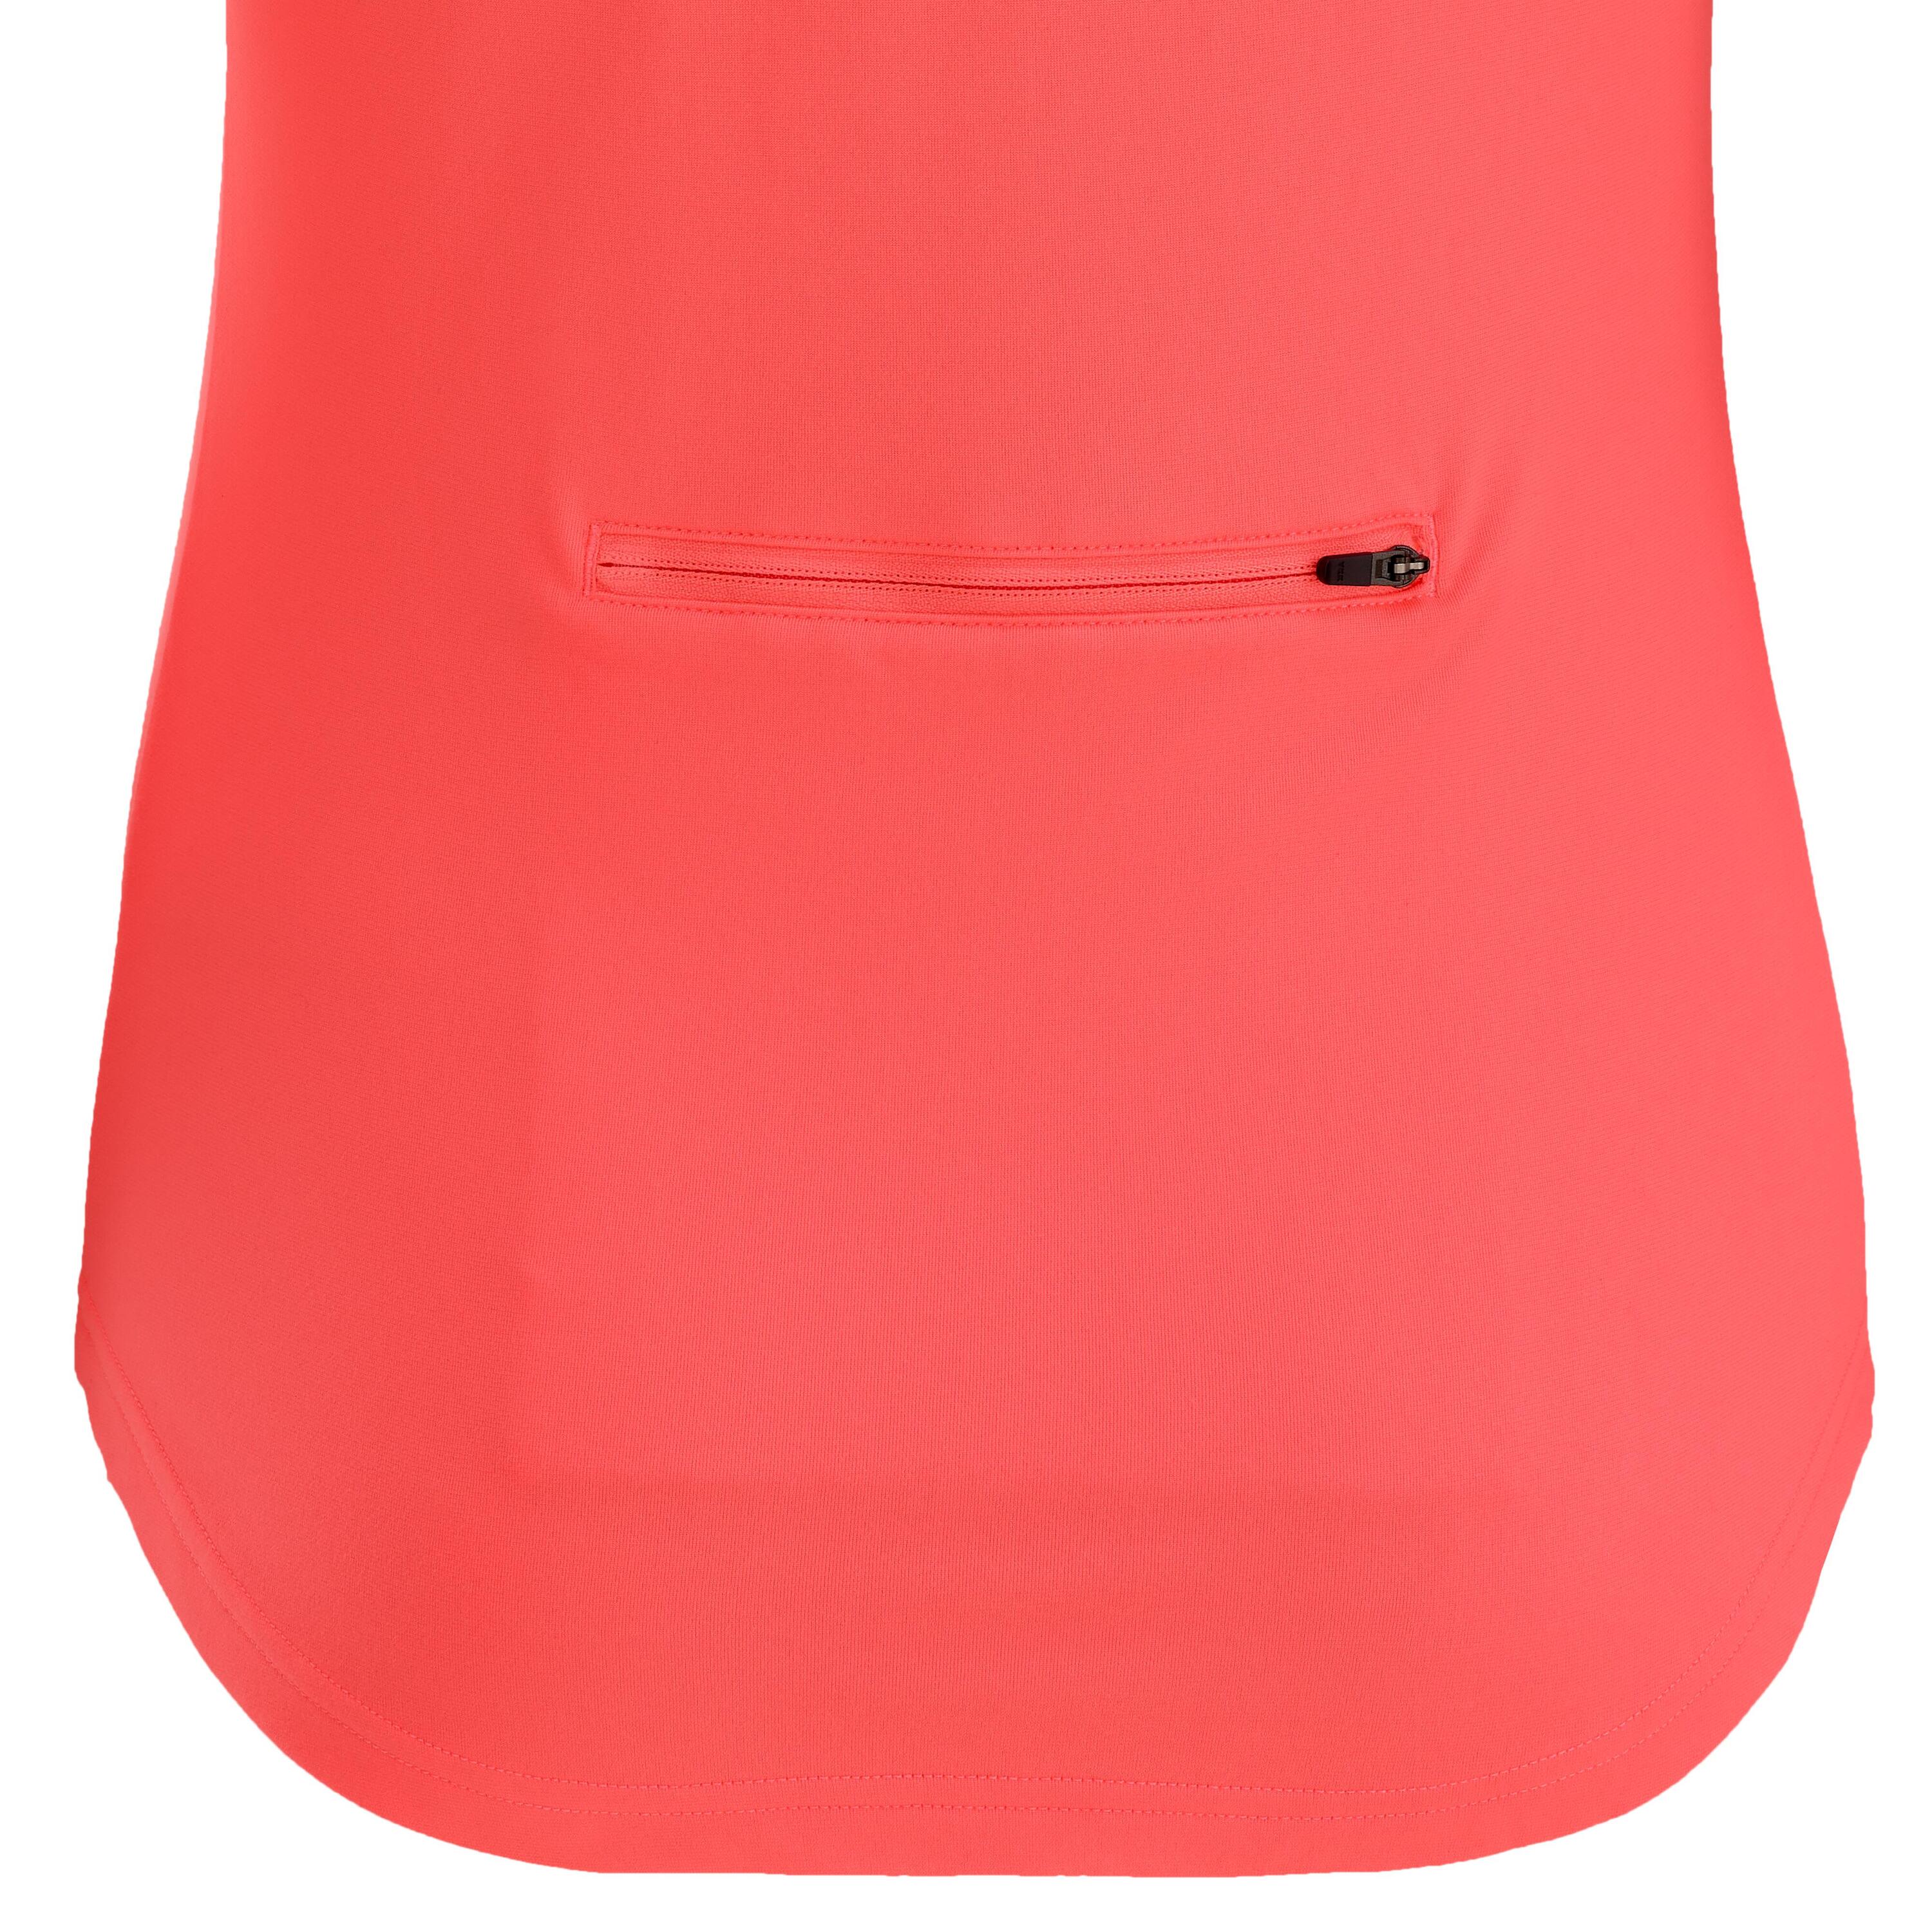 100 Women's Long-Sleeved Road Cycling Jersey - Coral 5/7